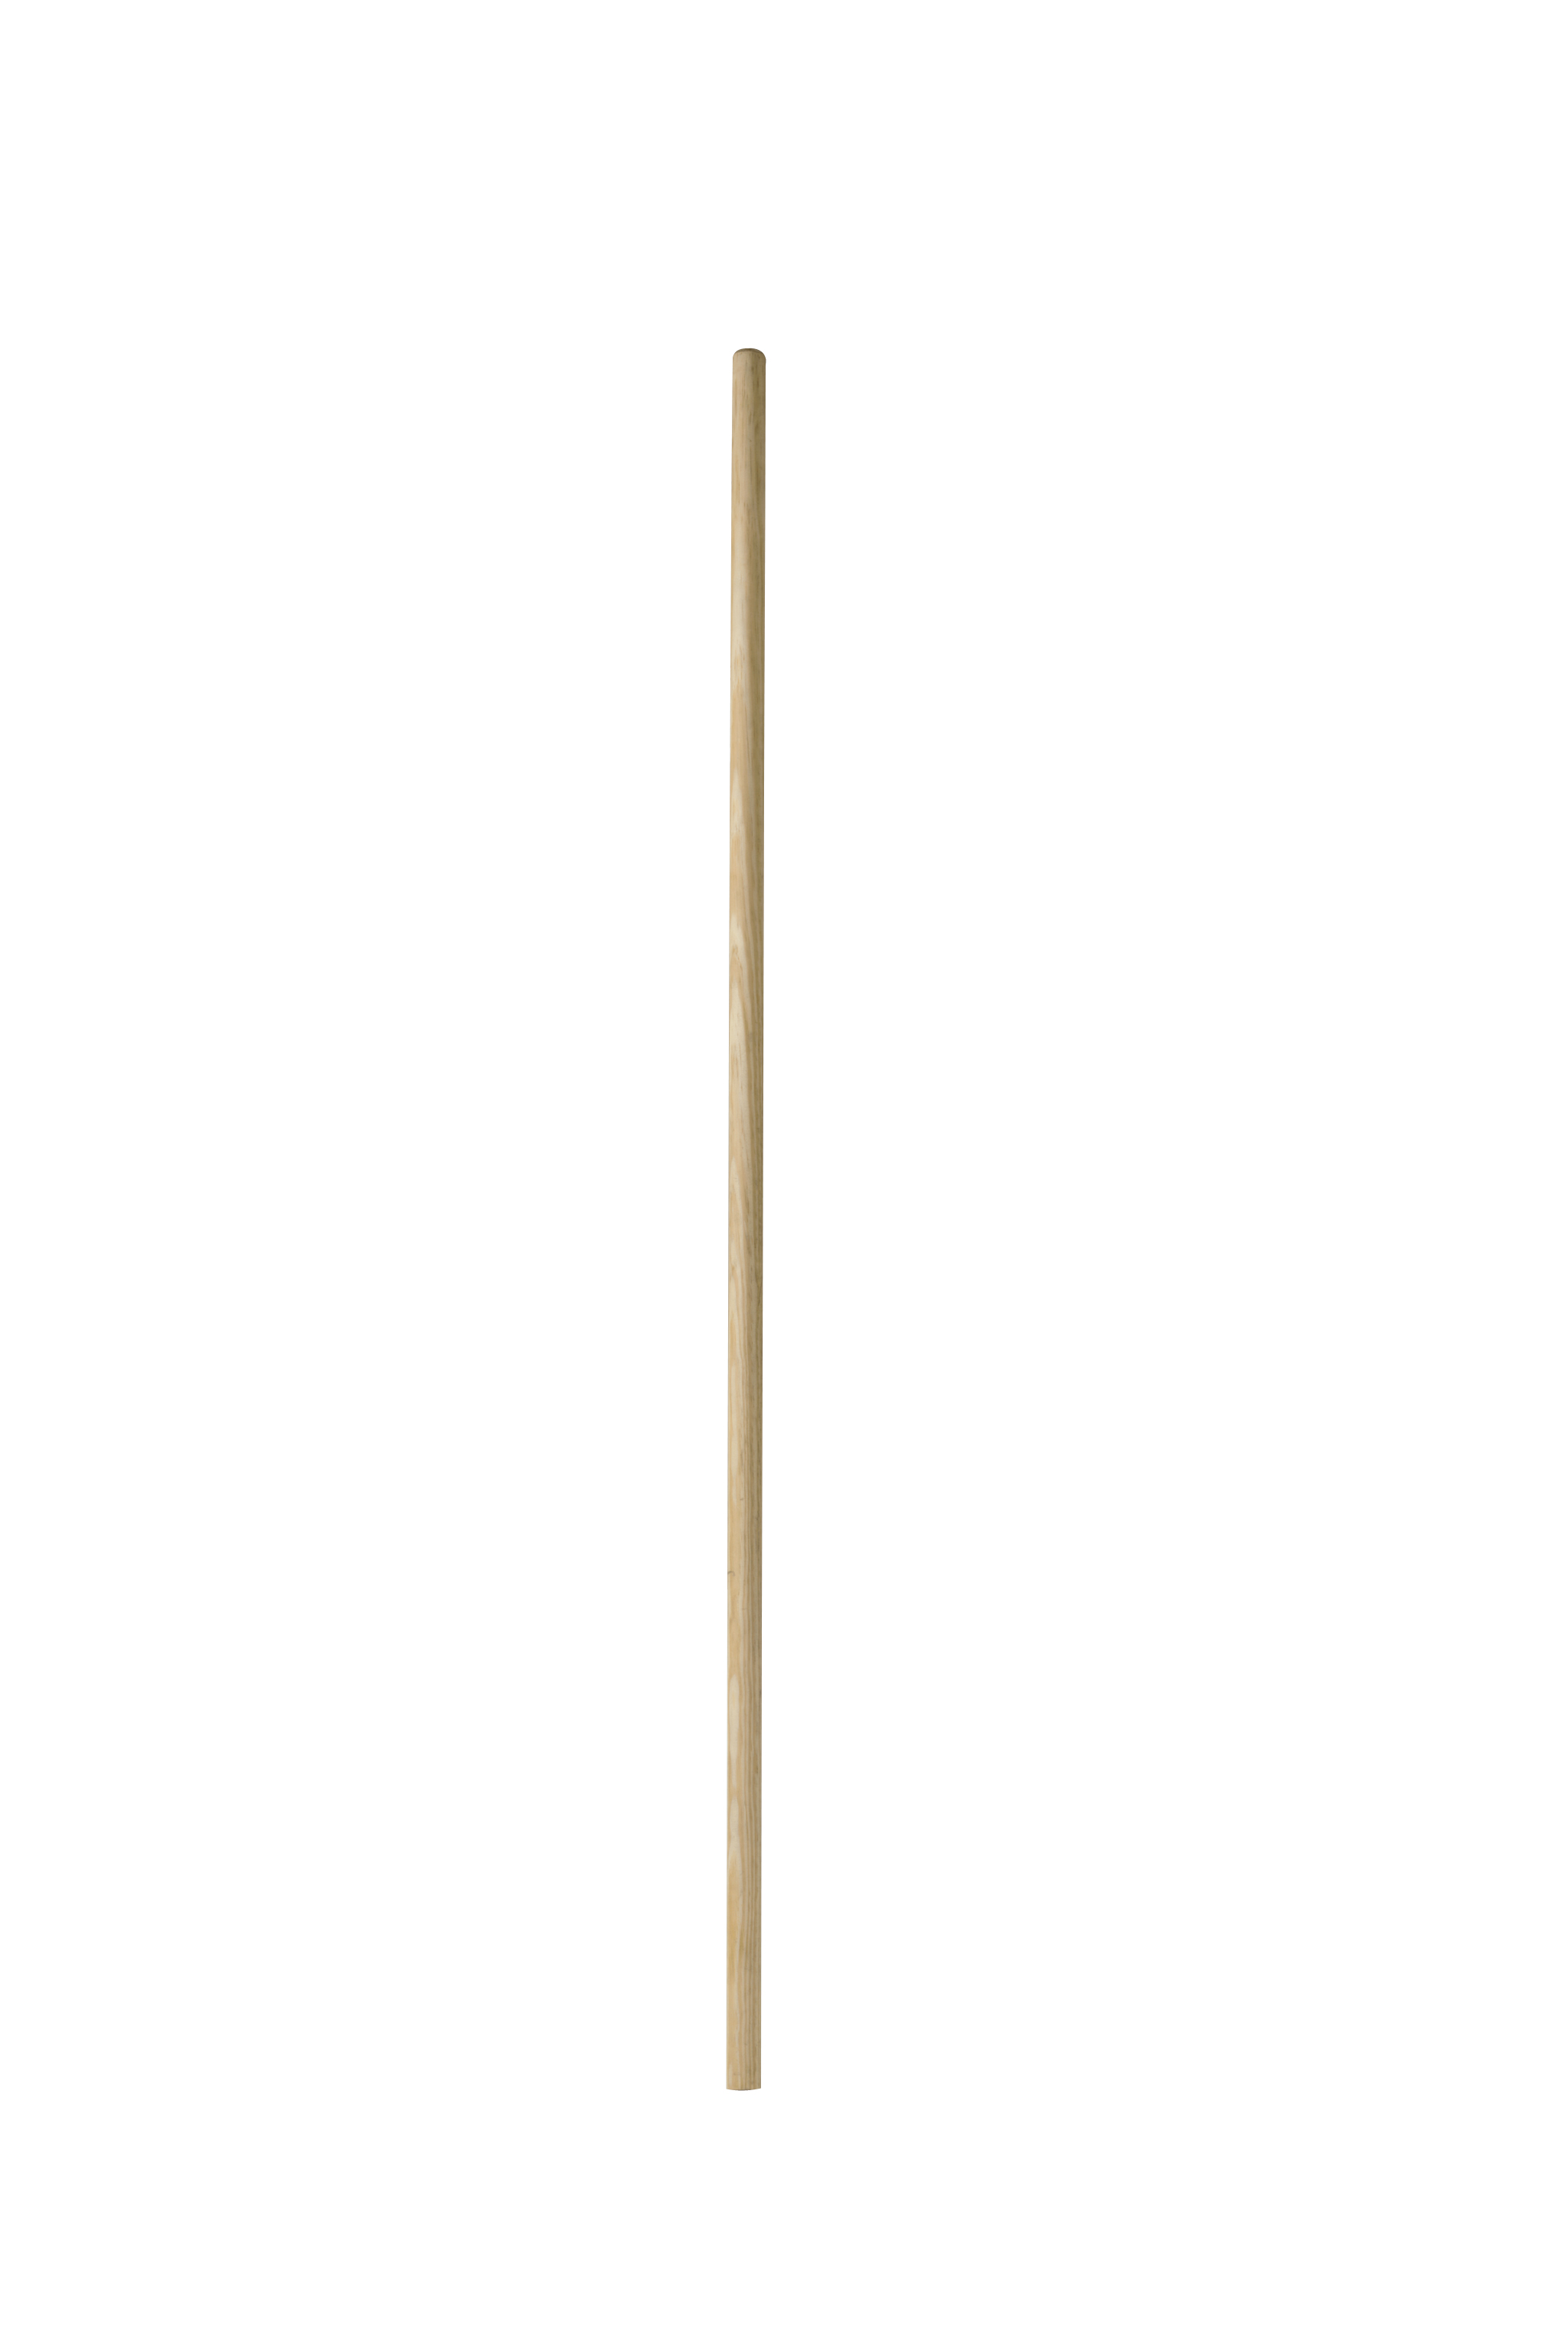 15/16 Inch Wood Handle for Small Brooms 48 Inch